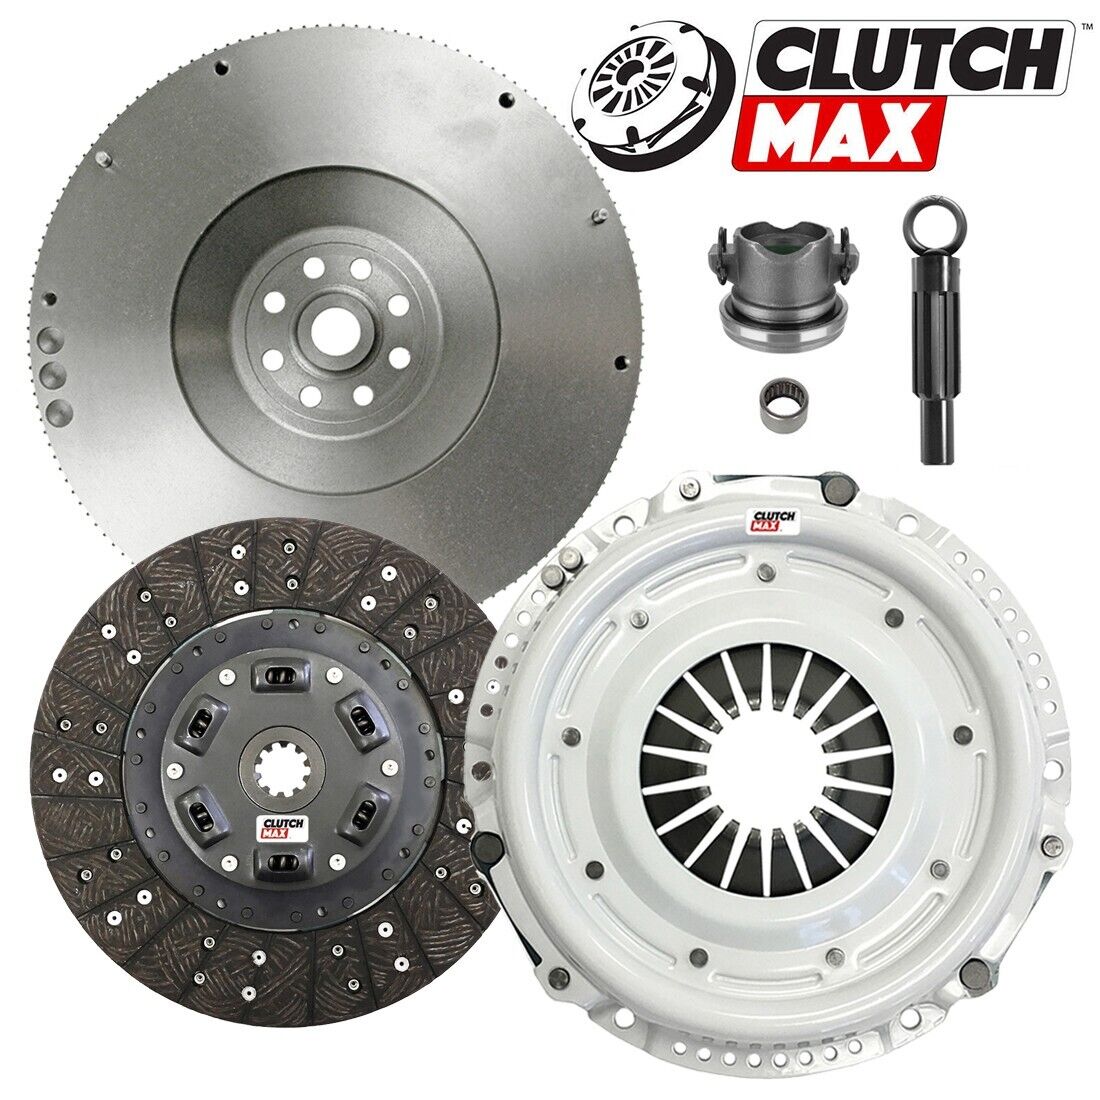 STAGE 2 CLUTCH KIT & FLYWHEEL for 2007-2011 JEEP WRANGLER RUBICON UNLIMITED 3.8L